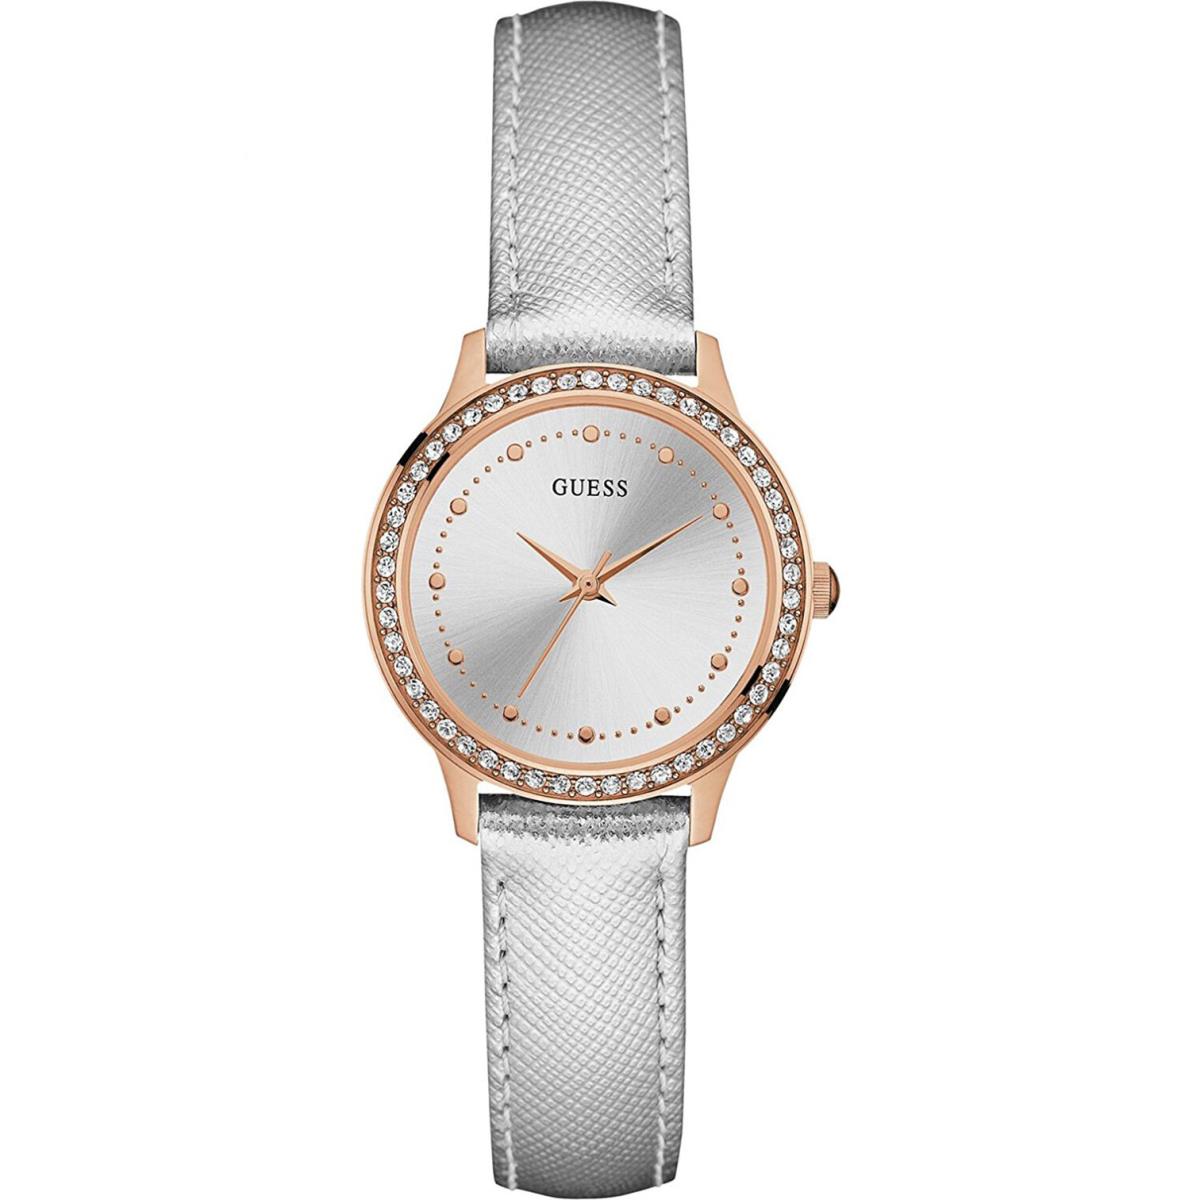 Guess W0648L11 Ladies Dress Stainless Steel Rose-tone Crystal Accented Bezel